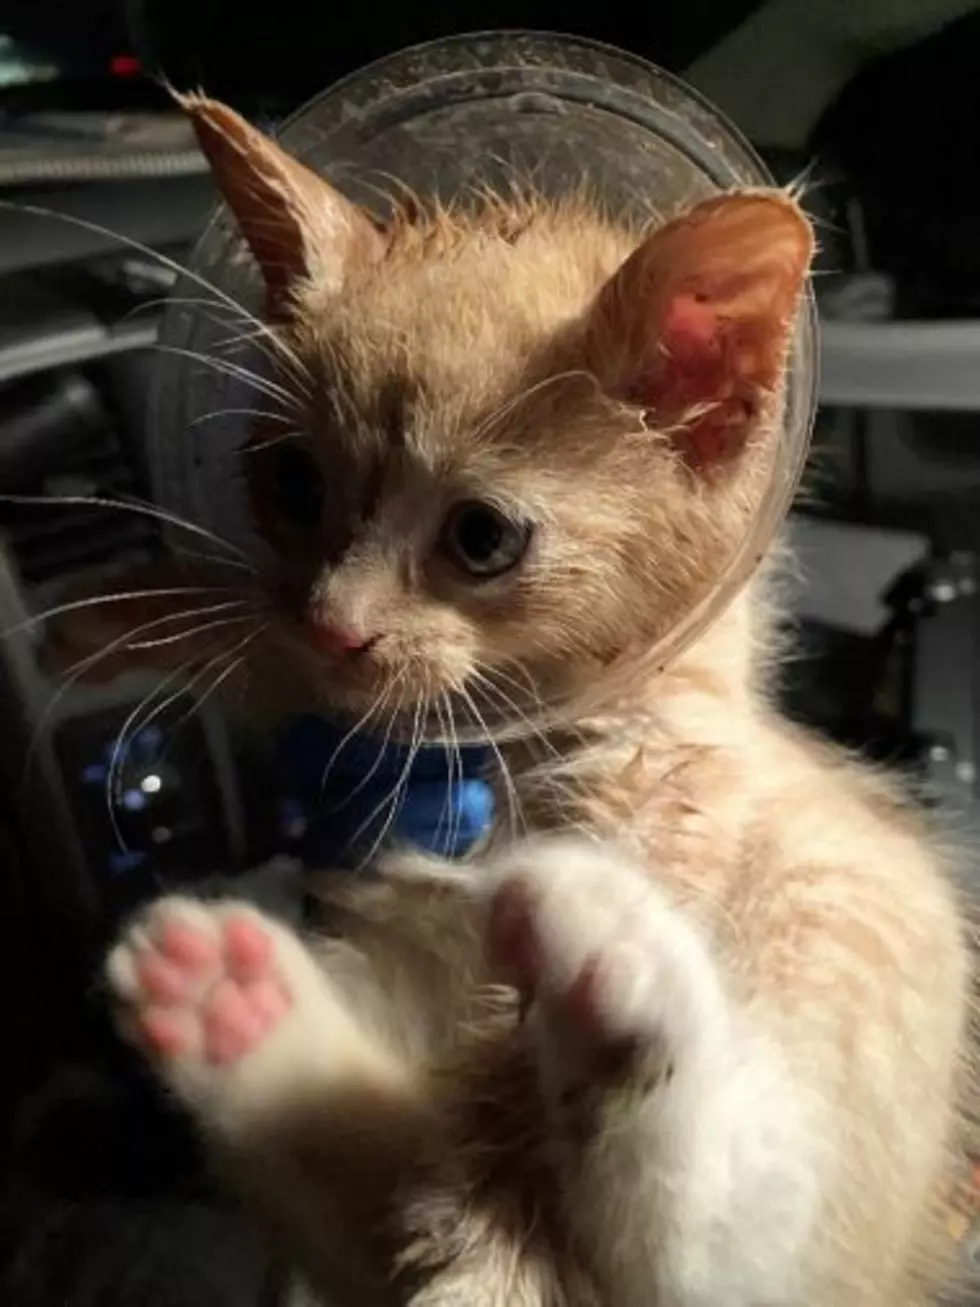 Western New York Kitten Freed From A Coffee Cup [PHOTO]